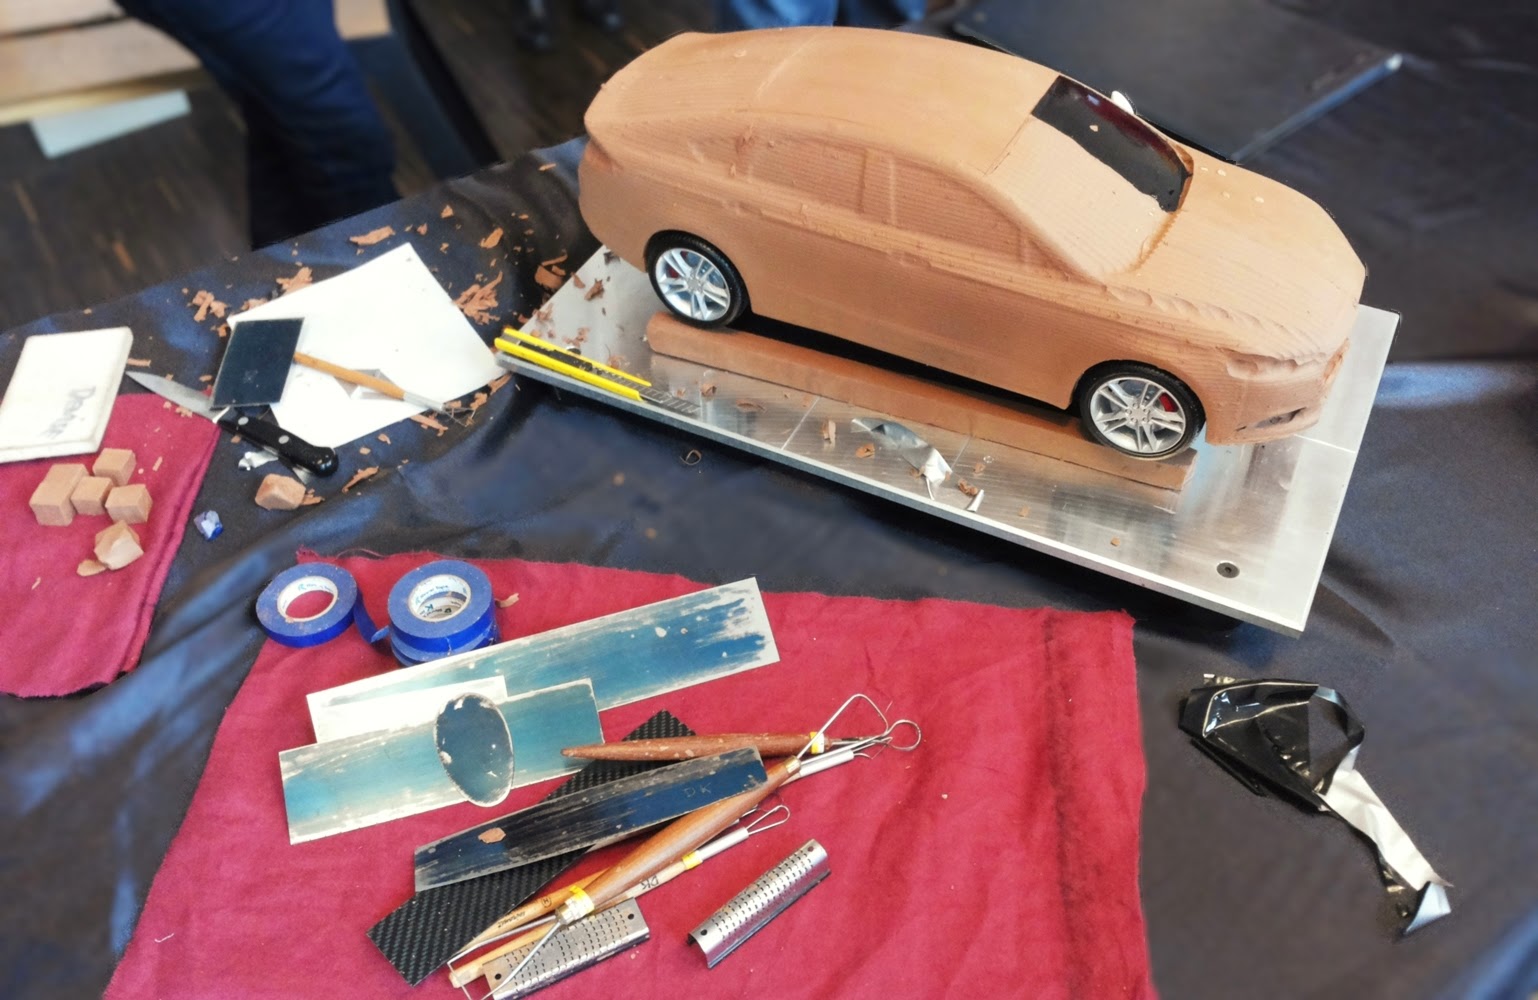 Workshop „Inside the Clay Modelling Studio“ by Ford | Photo © Raphael Gürth/autofilou.at